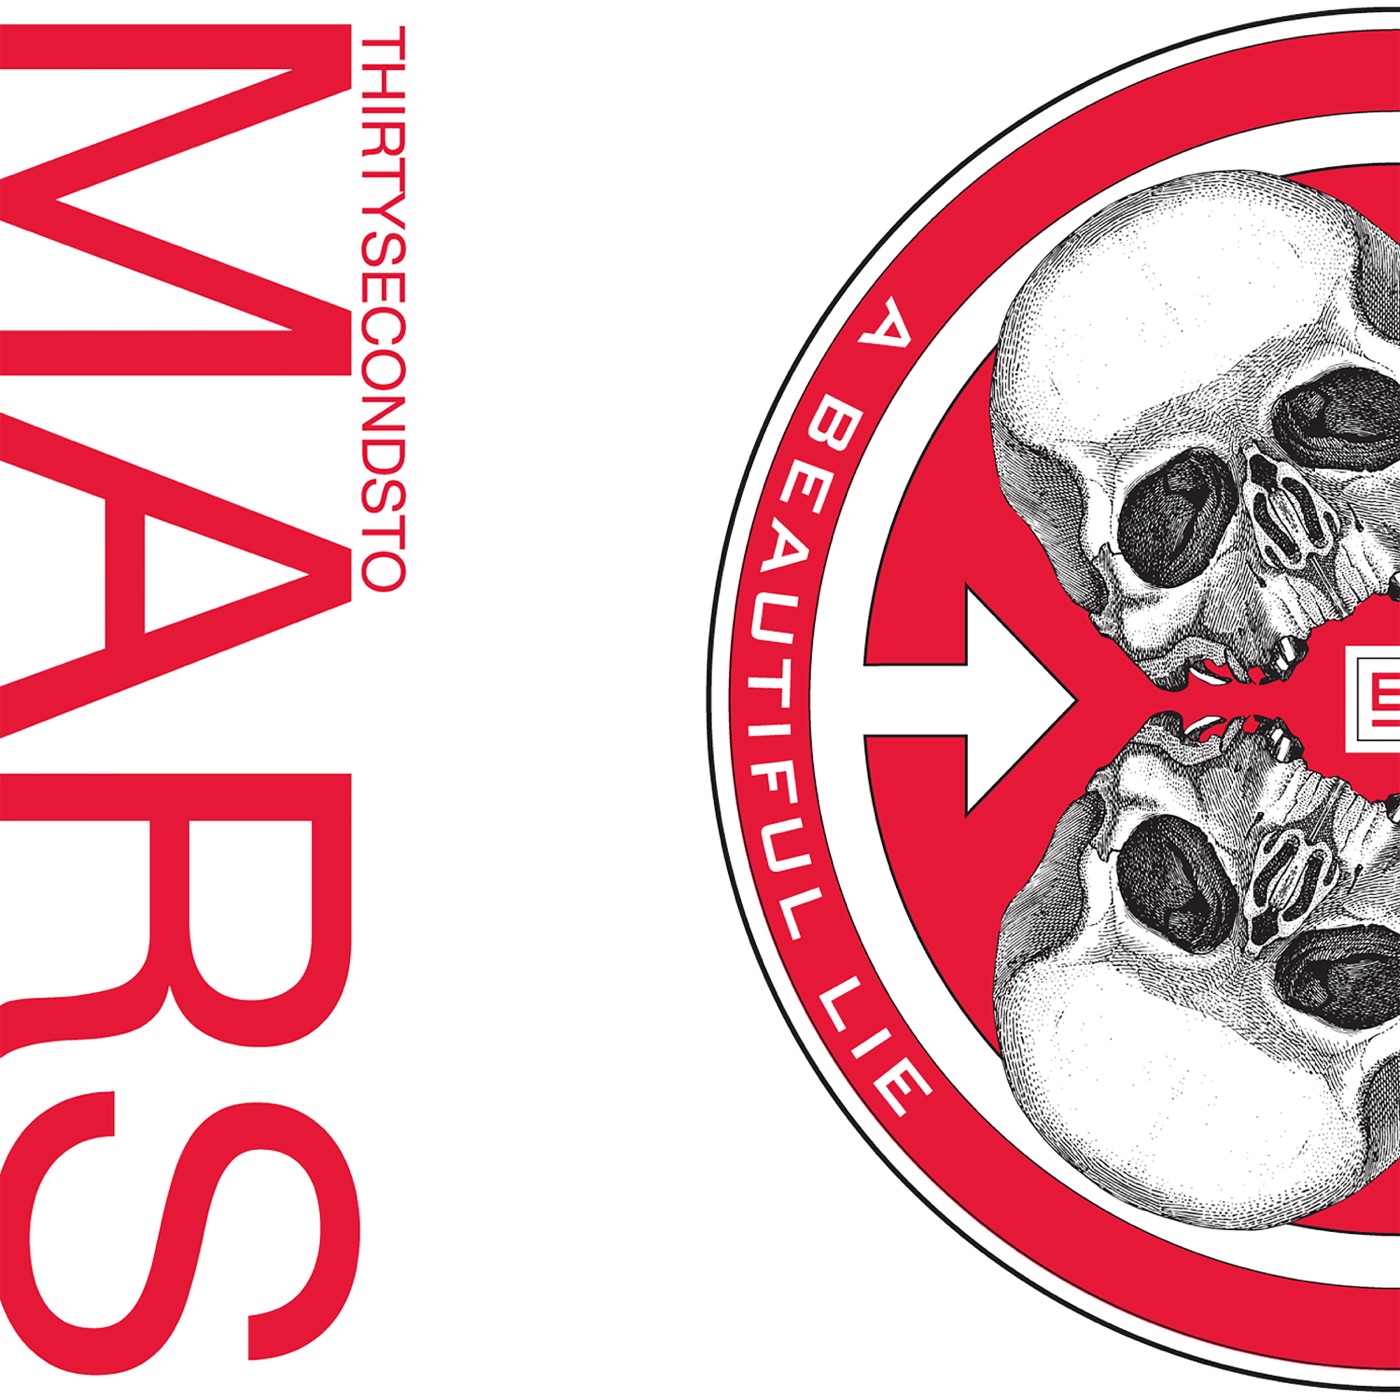 A Beautiful Lie by Thirty Seconds To Mars